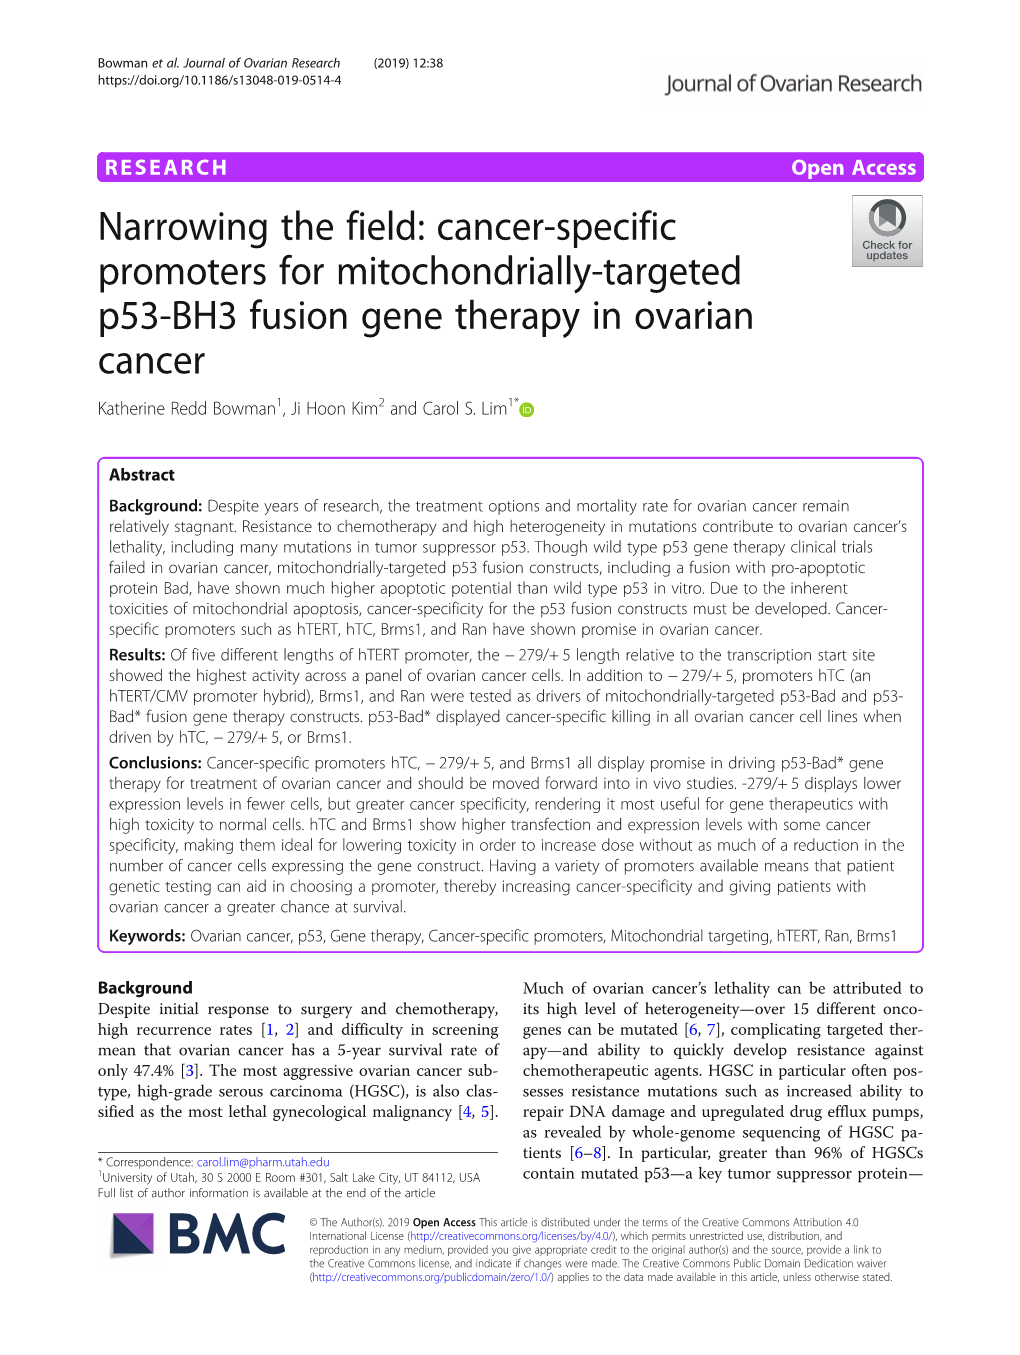 Cancer-Specific Promoters for Mitochondrially-Targeted P53-BH3 Fusion Gene Therapy in Ovarian Cancer Katherine Redd Bowman1, Ji Hoon Kim2 and Carol S